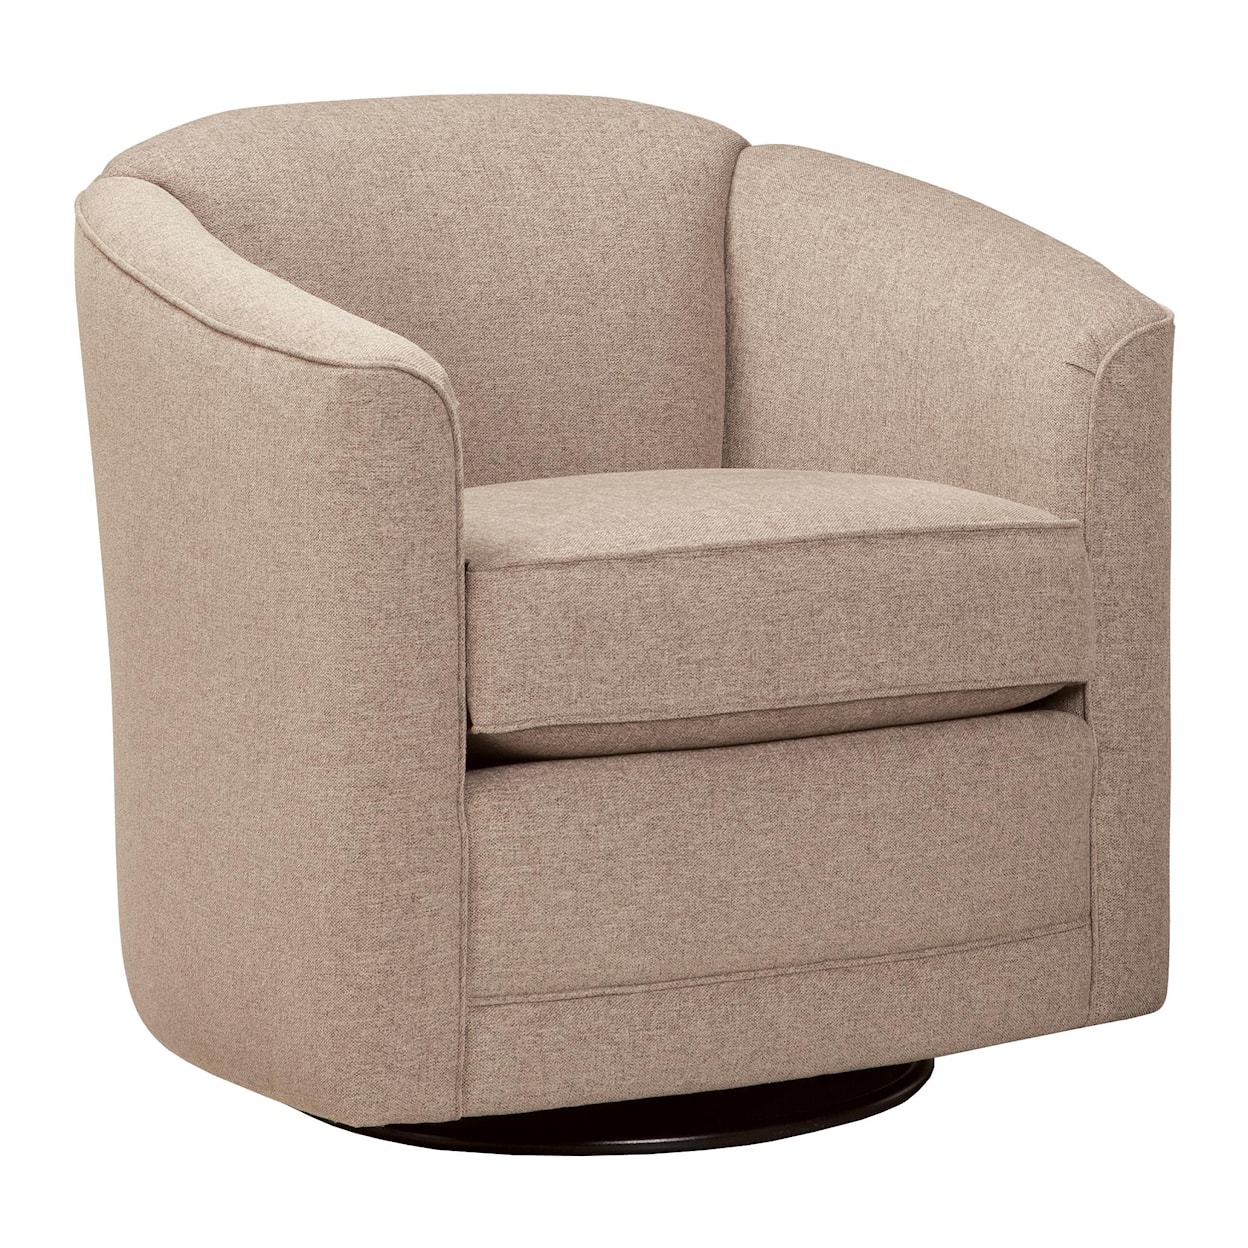 Smith Brothers 506 Swivel Glider Chair